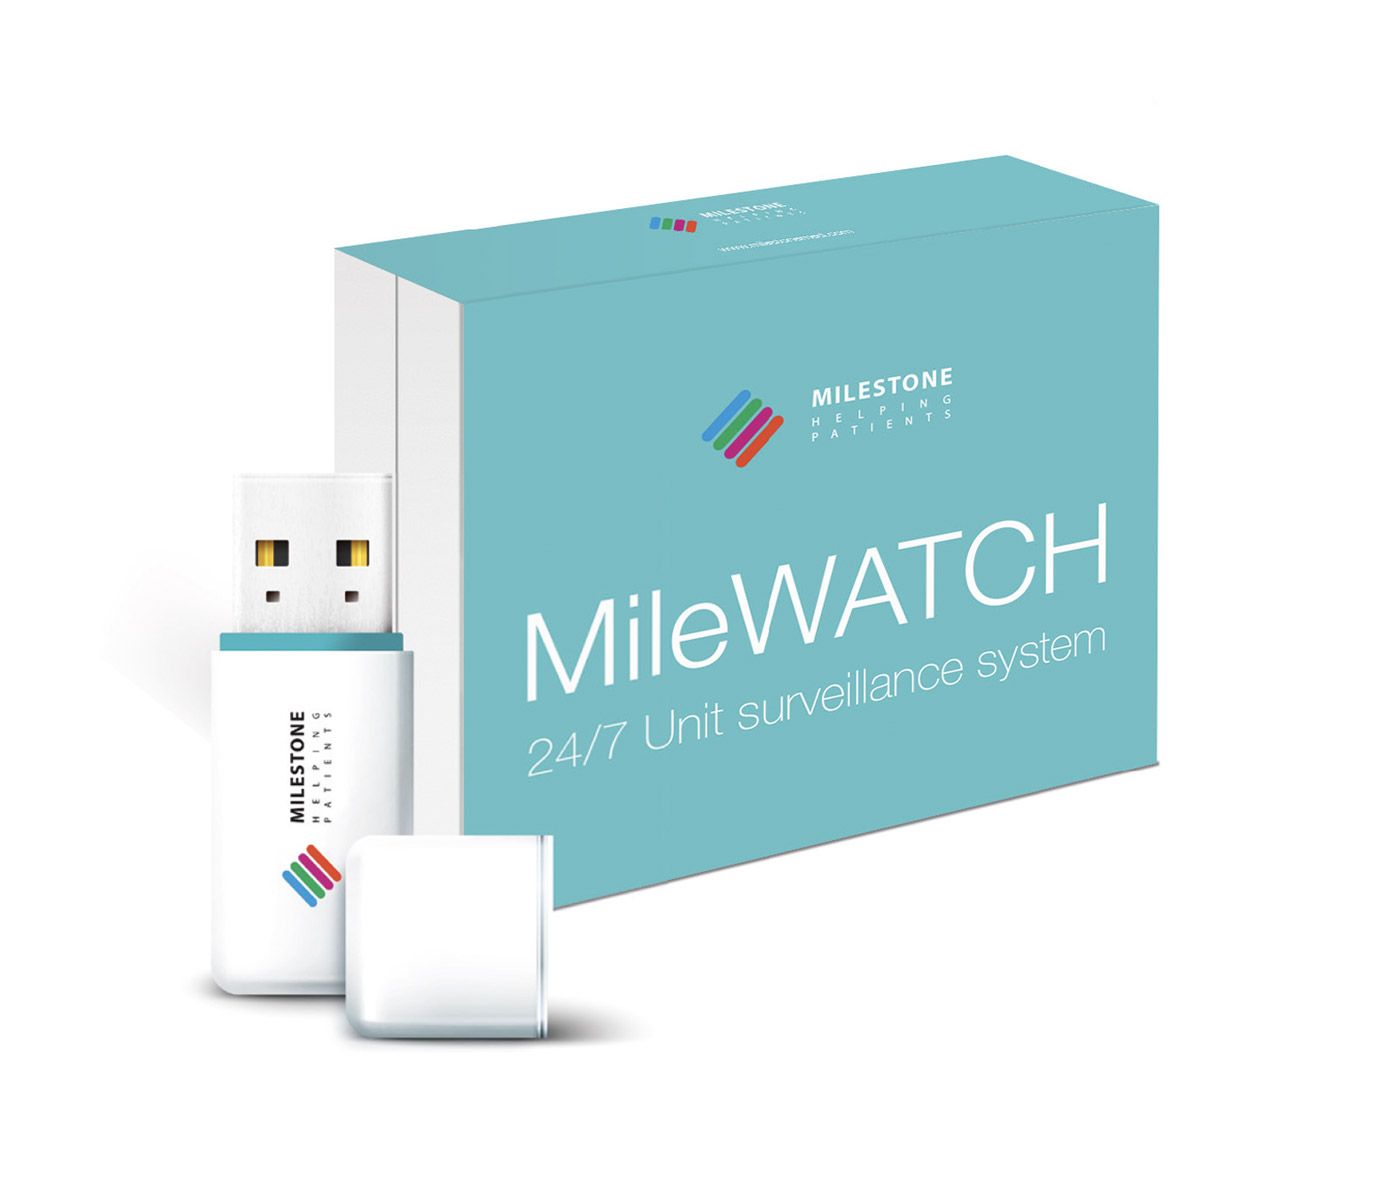 MileWATCH